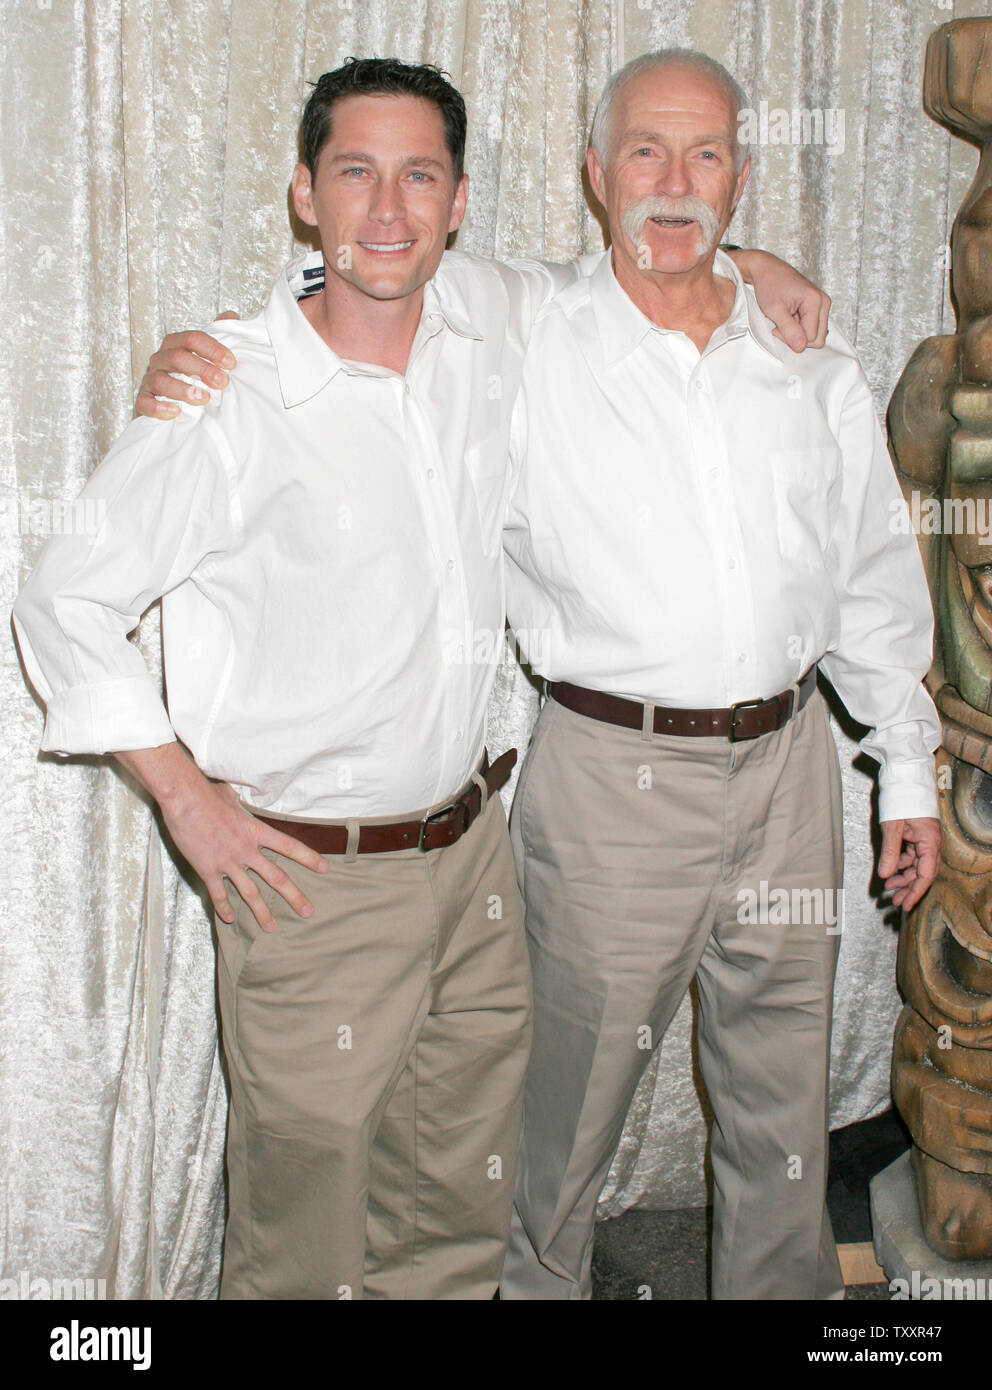 Eric Anderson, left, and Pat Abbott, who play the roles of professors, arrive at the cast party of a new reality series, 'The Real Gilligan's Island' at the Pearl night club  in Los Angeles,  November 30, 2004. (UPI Photo/Francis Specker) Stock Photo